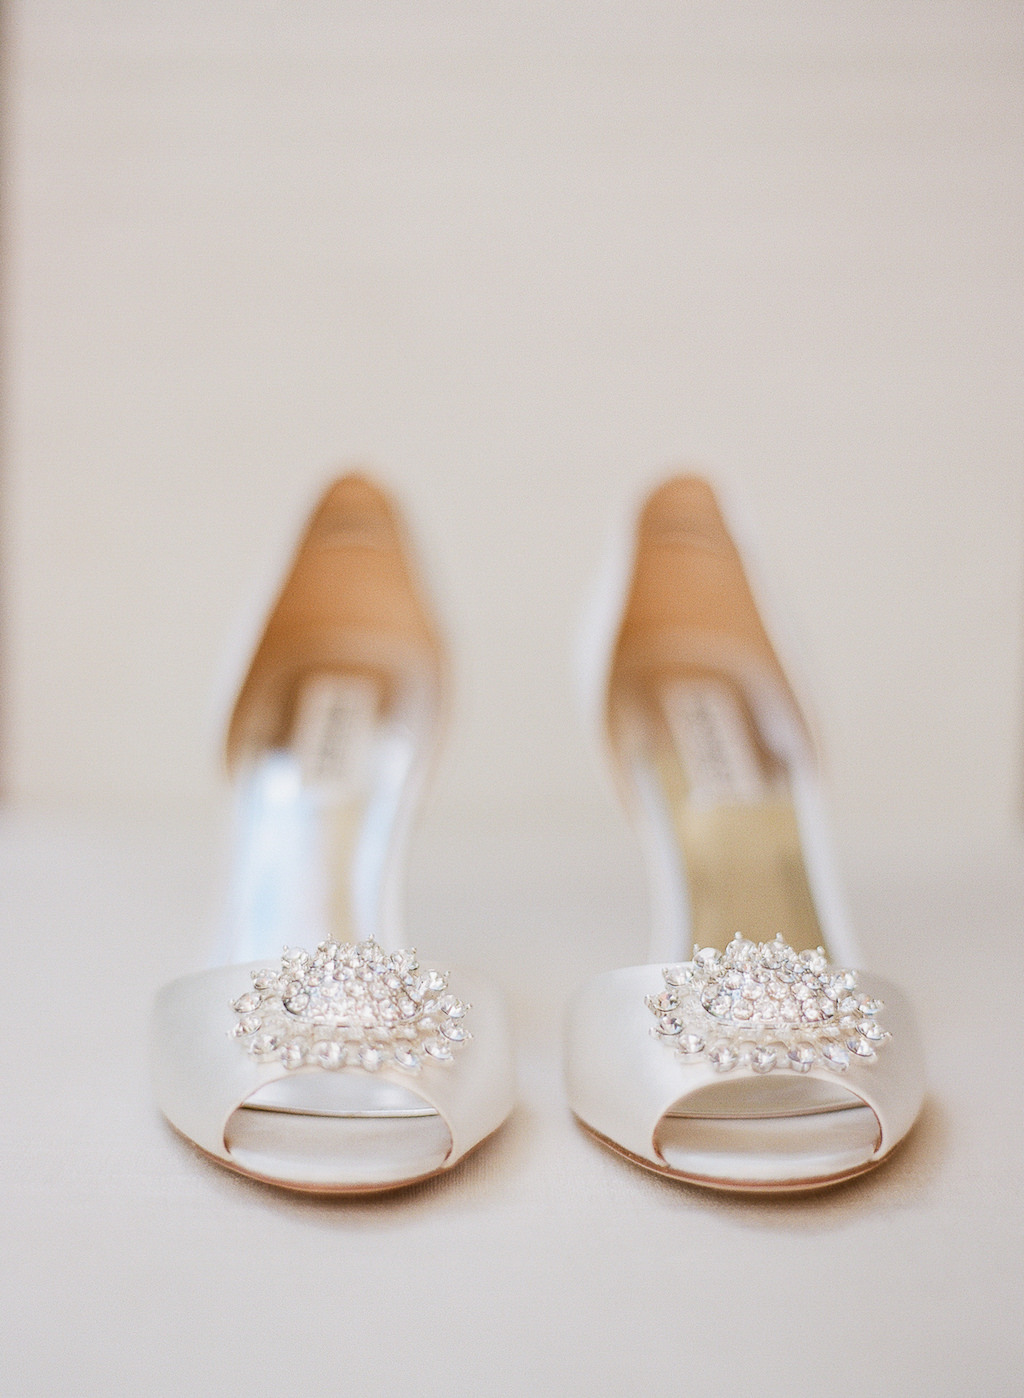 Peep Toe Ivory Satin with Jeweled Floral Accent Wedding Shoes